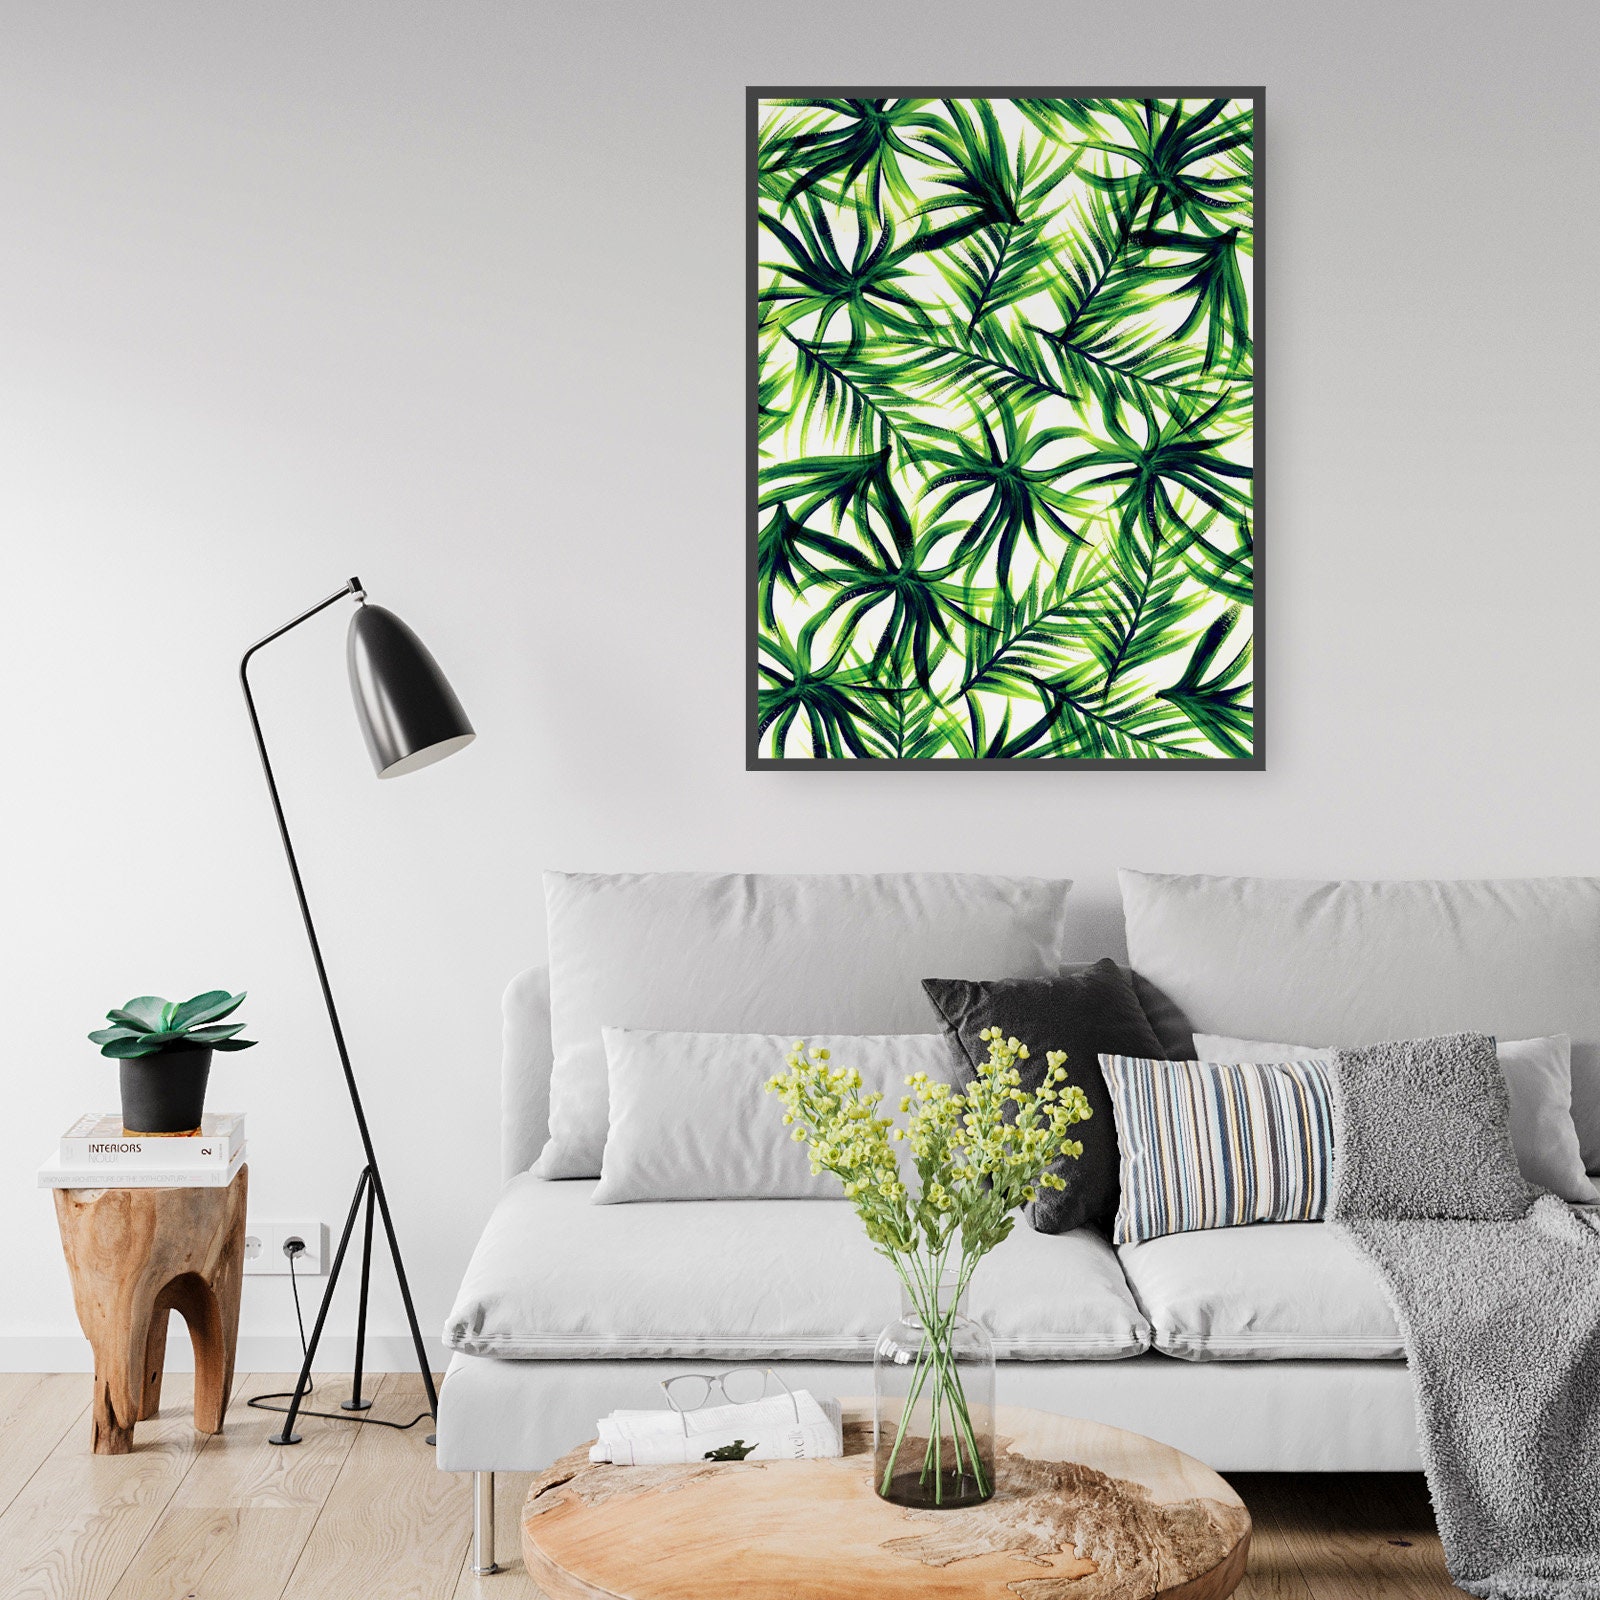 Palm Leaves Pattern Green Tropical Jungle Wall Art Home Decor | Etsy